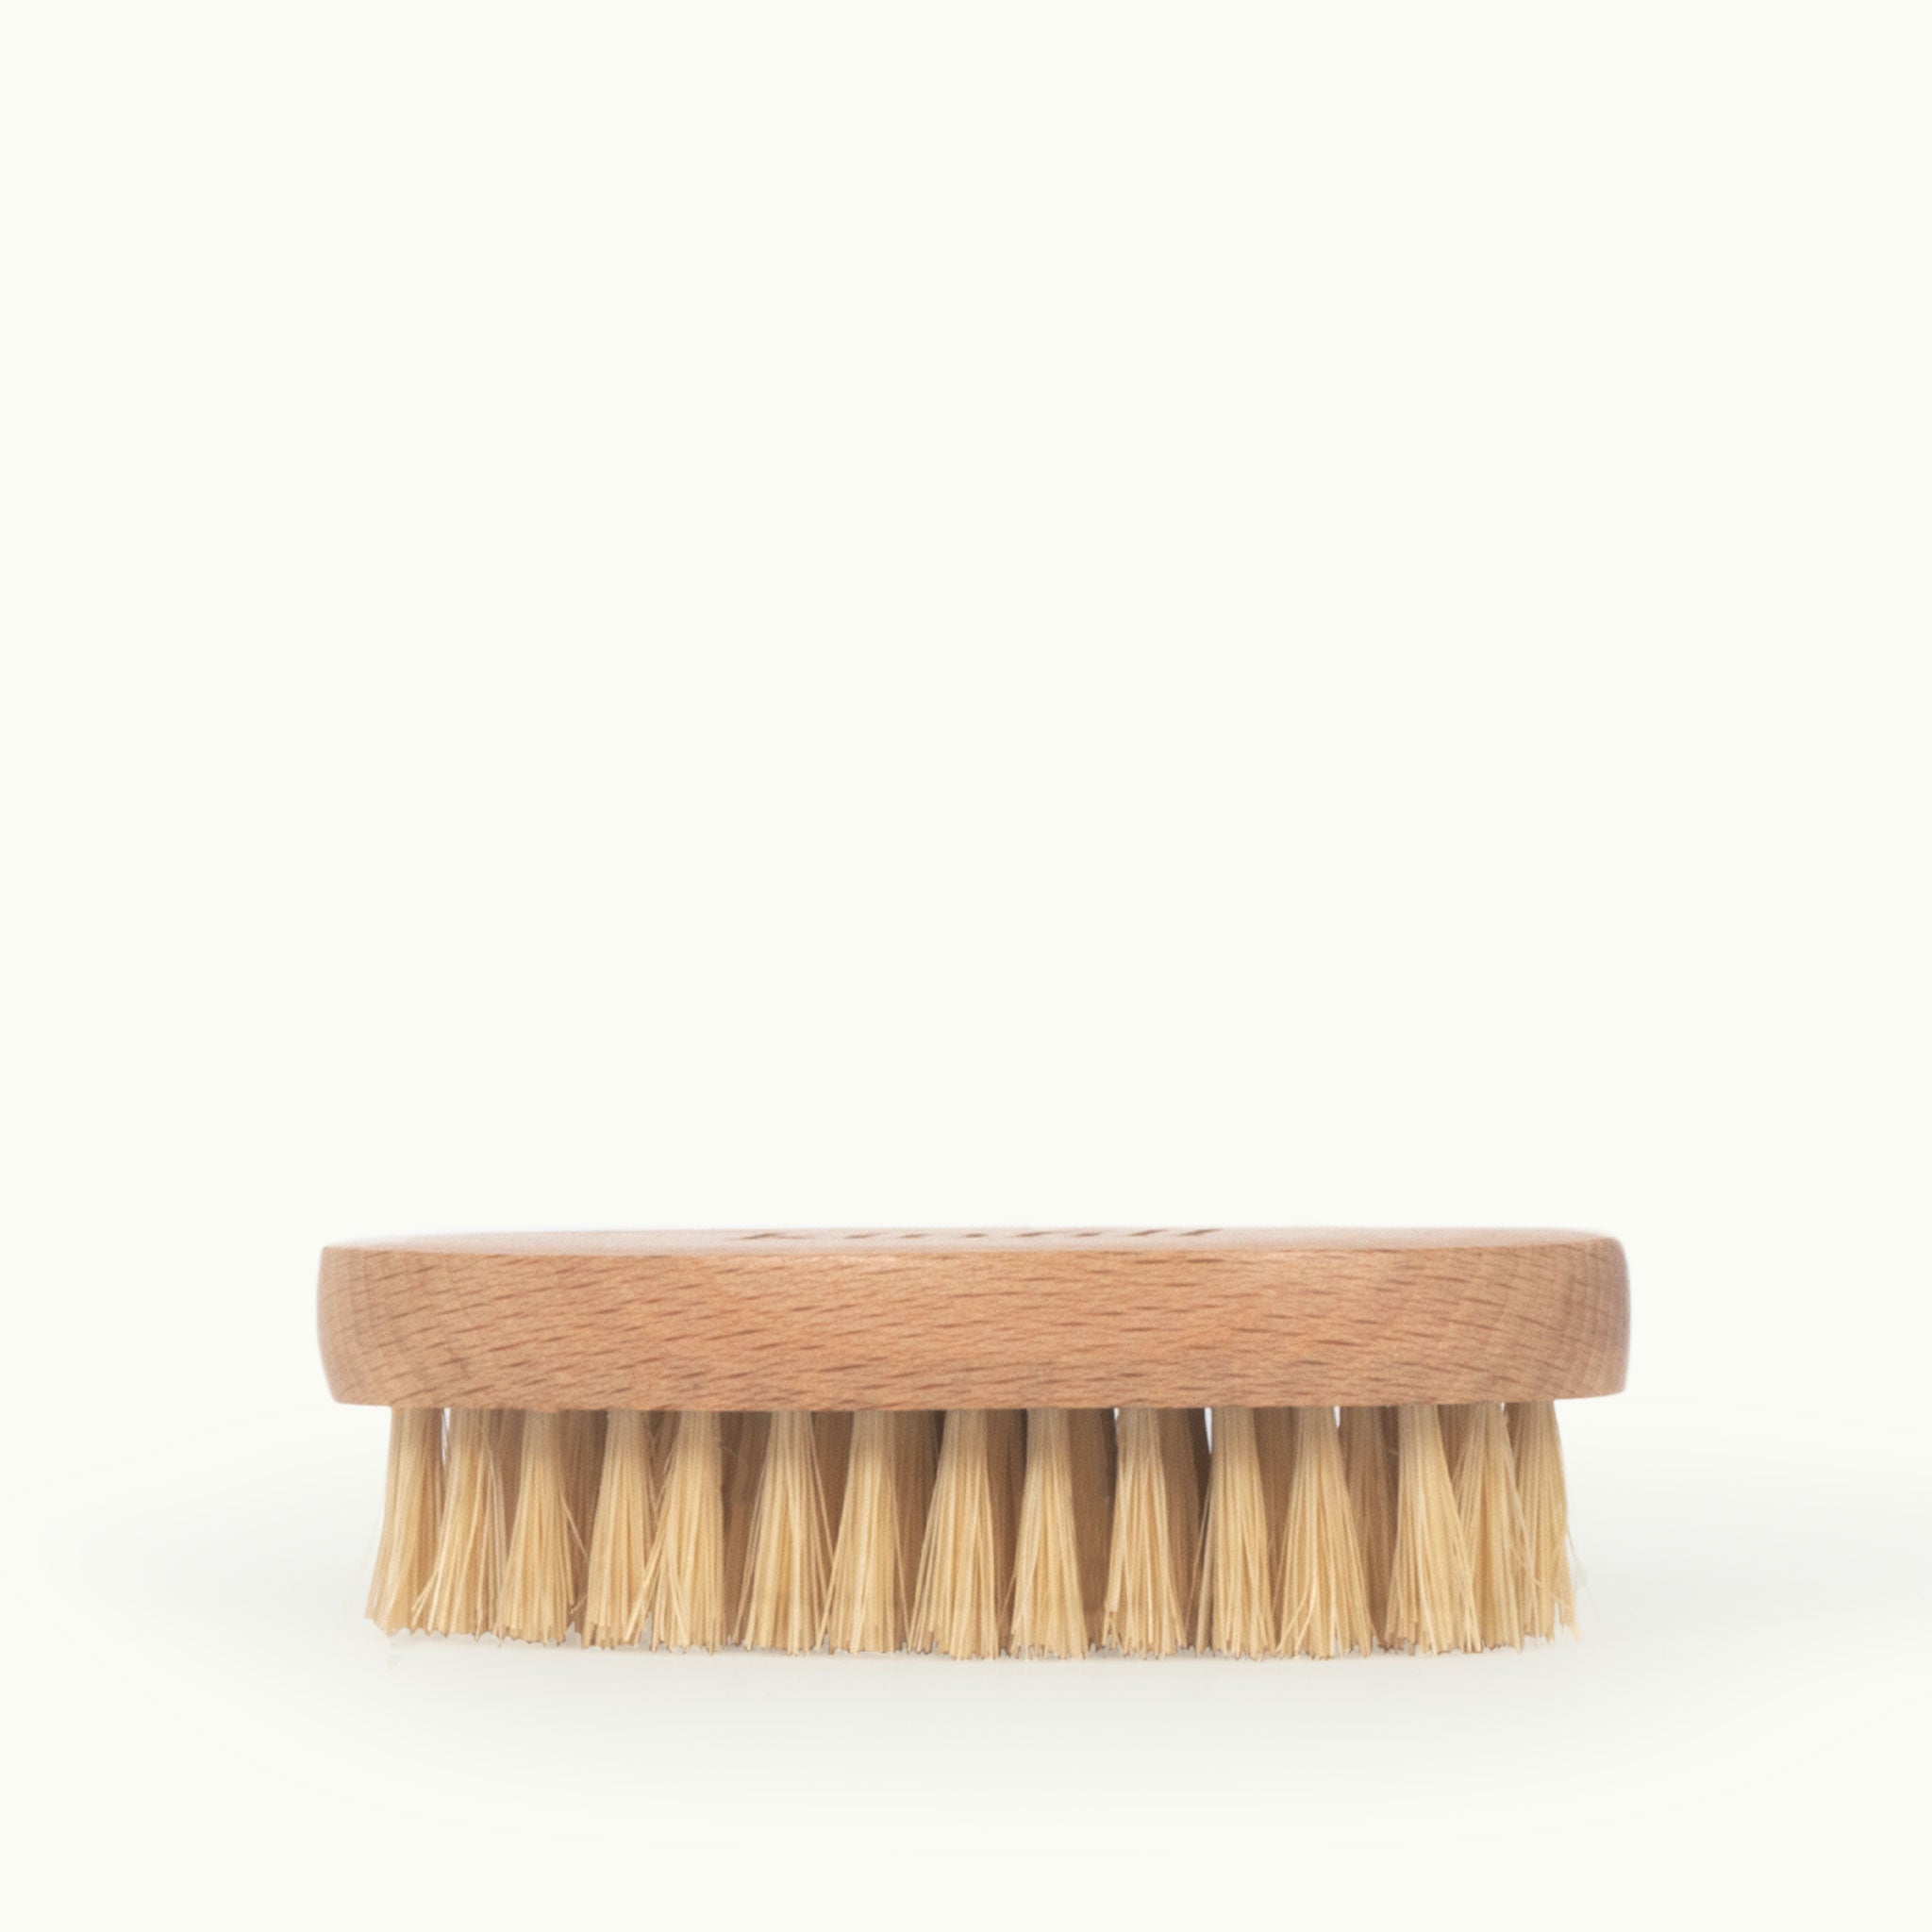 Brosse textile – kinfill care